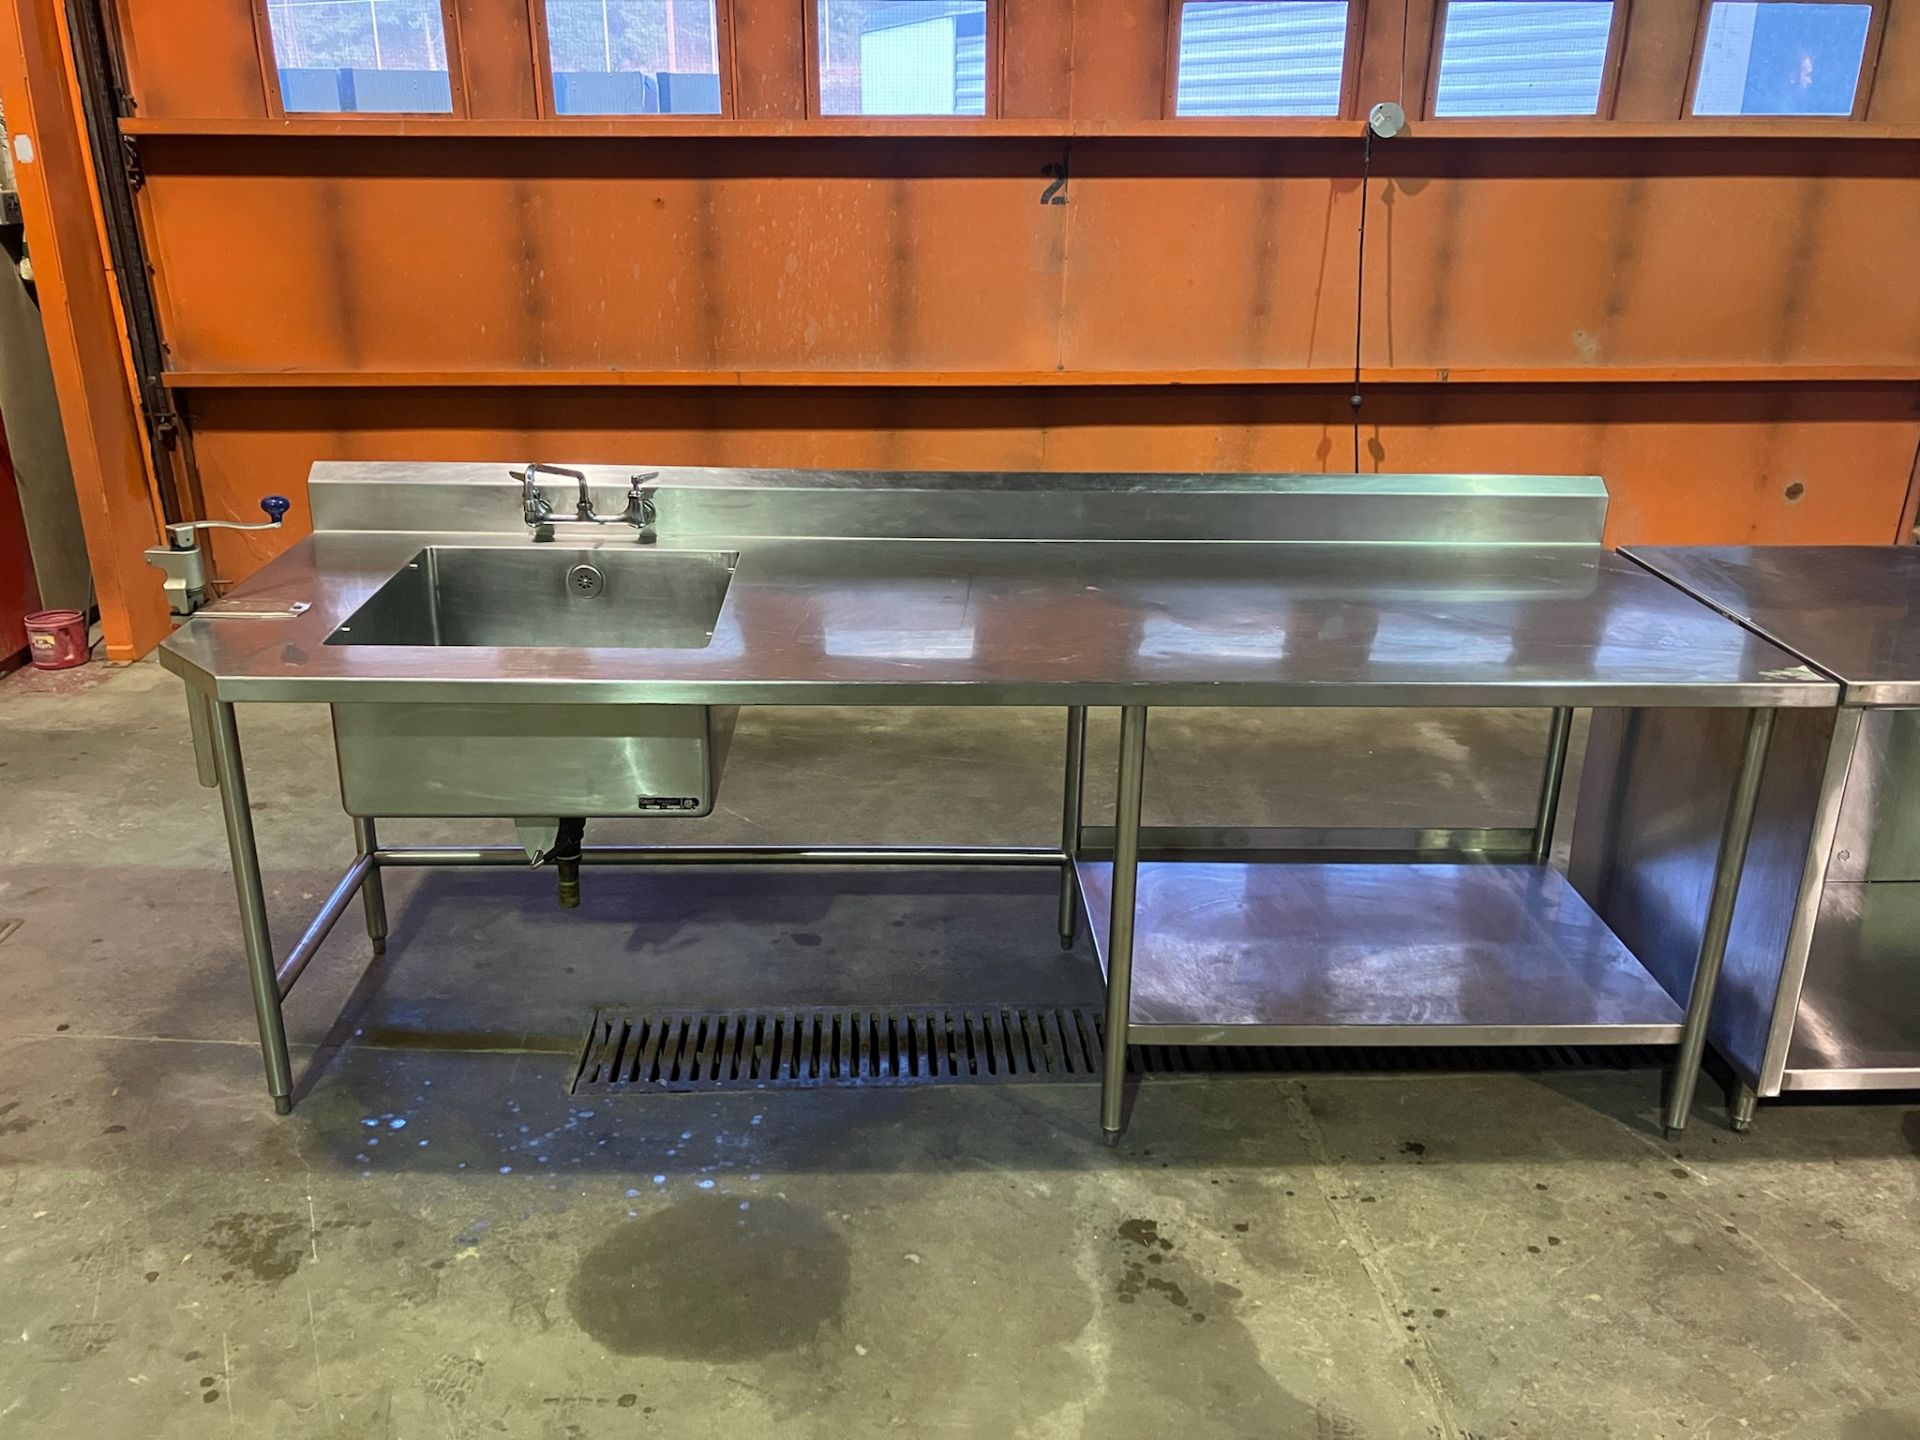 Quest 36 x 104" Stainless Steel Work Table with Sink and Can Opener